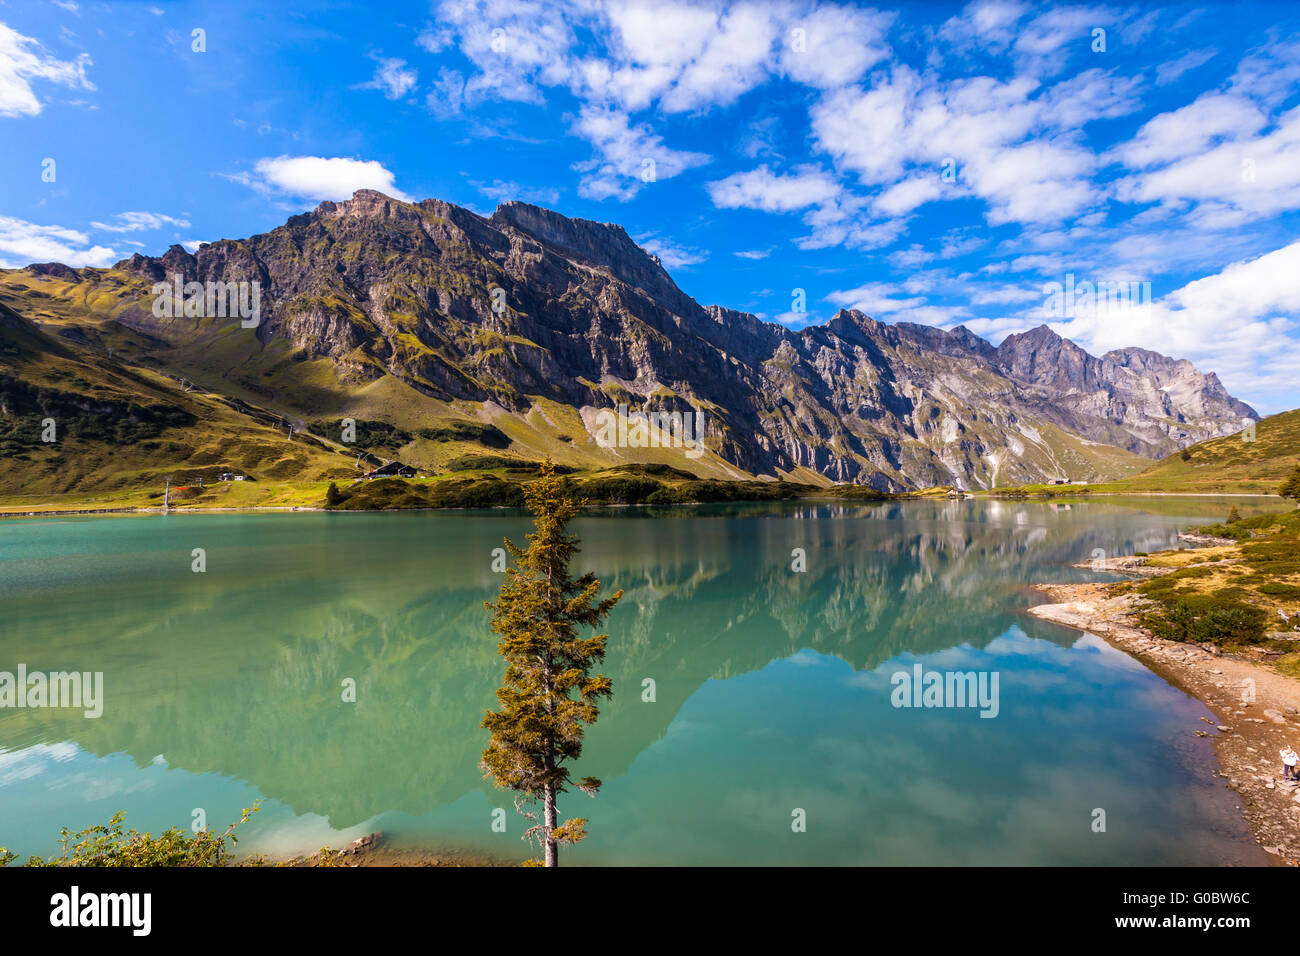 Panorama view of Truebsee (lake) on a sunny summer day with Braustock in background and beautiful reflection in water, canton of Stock Photo